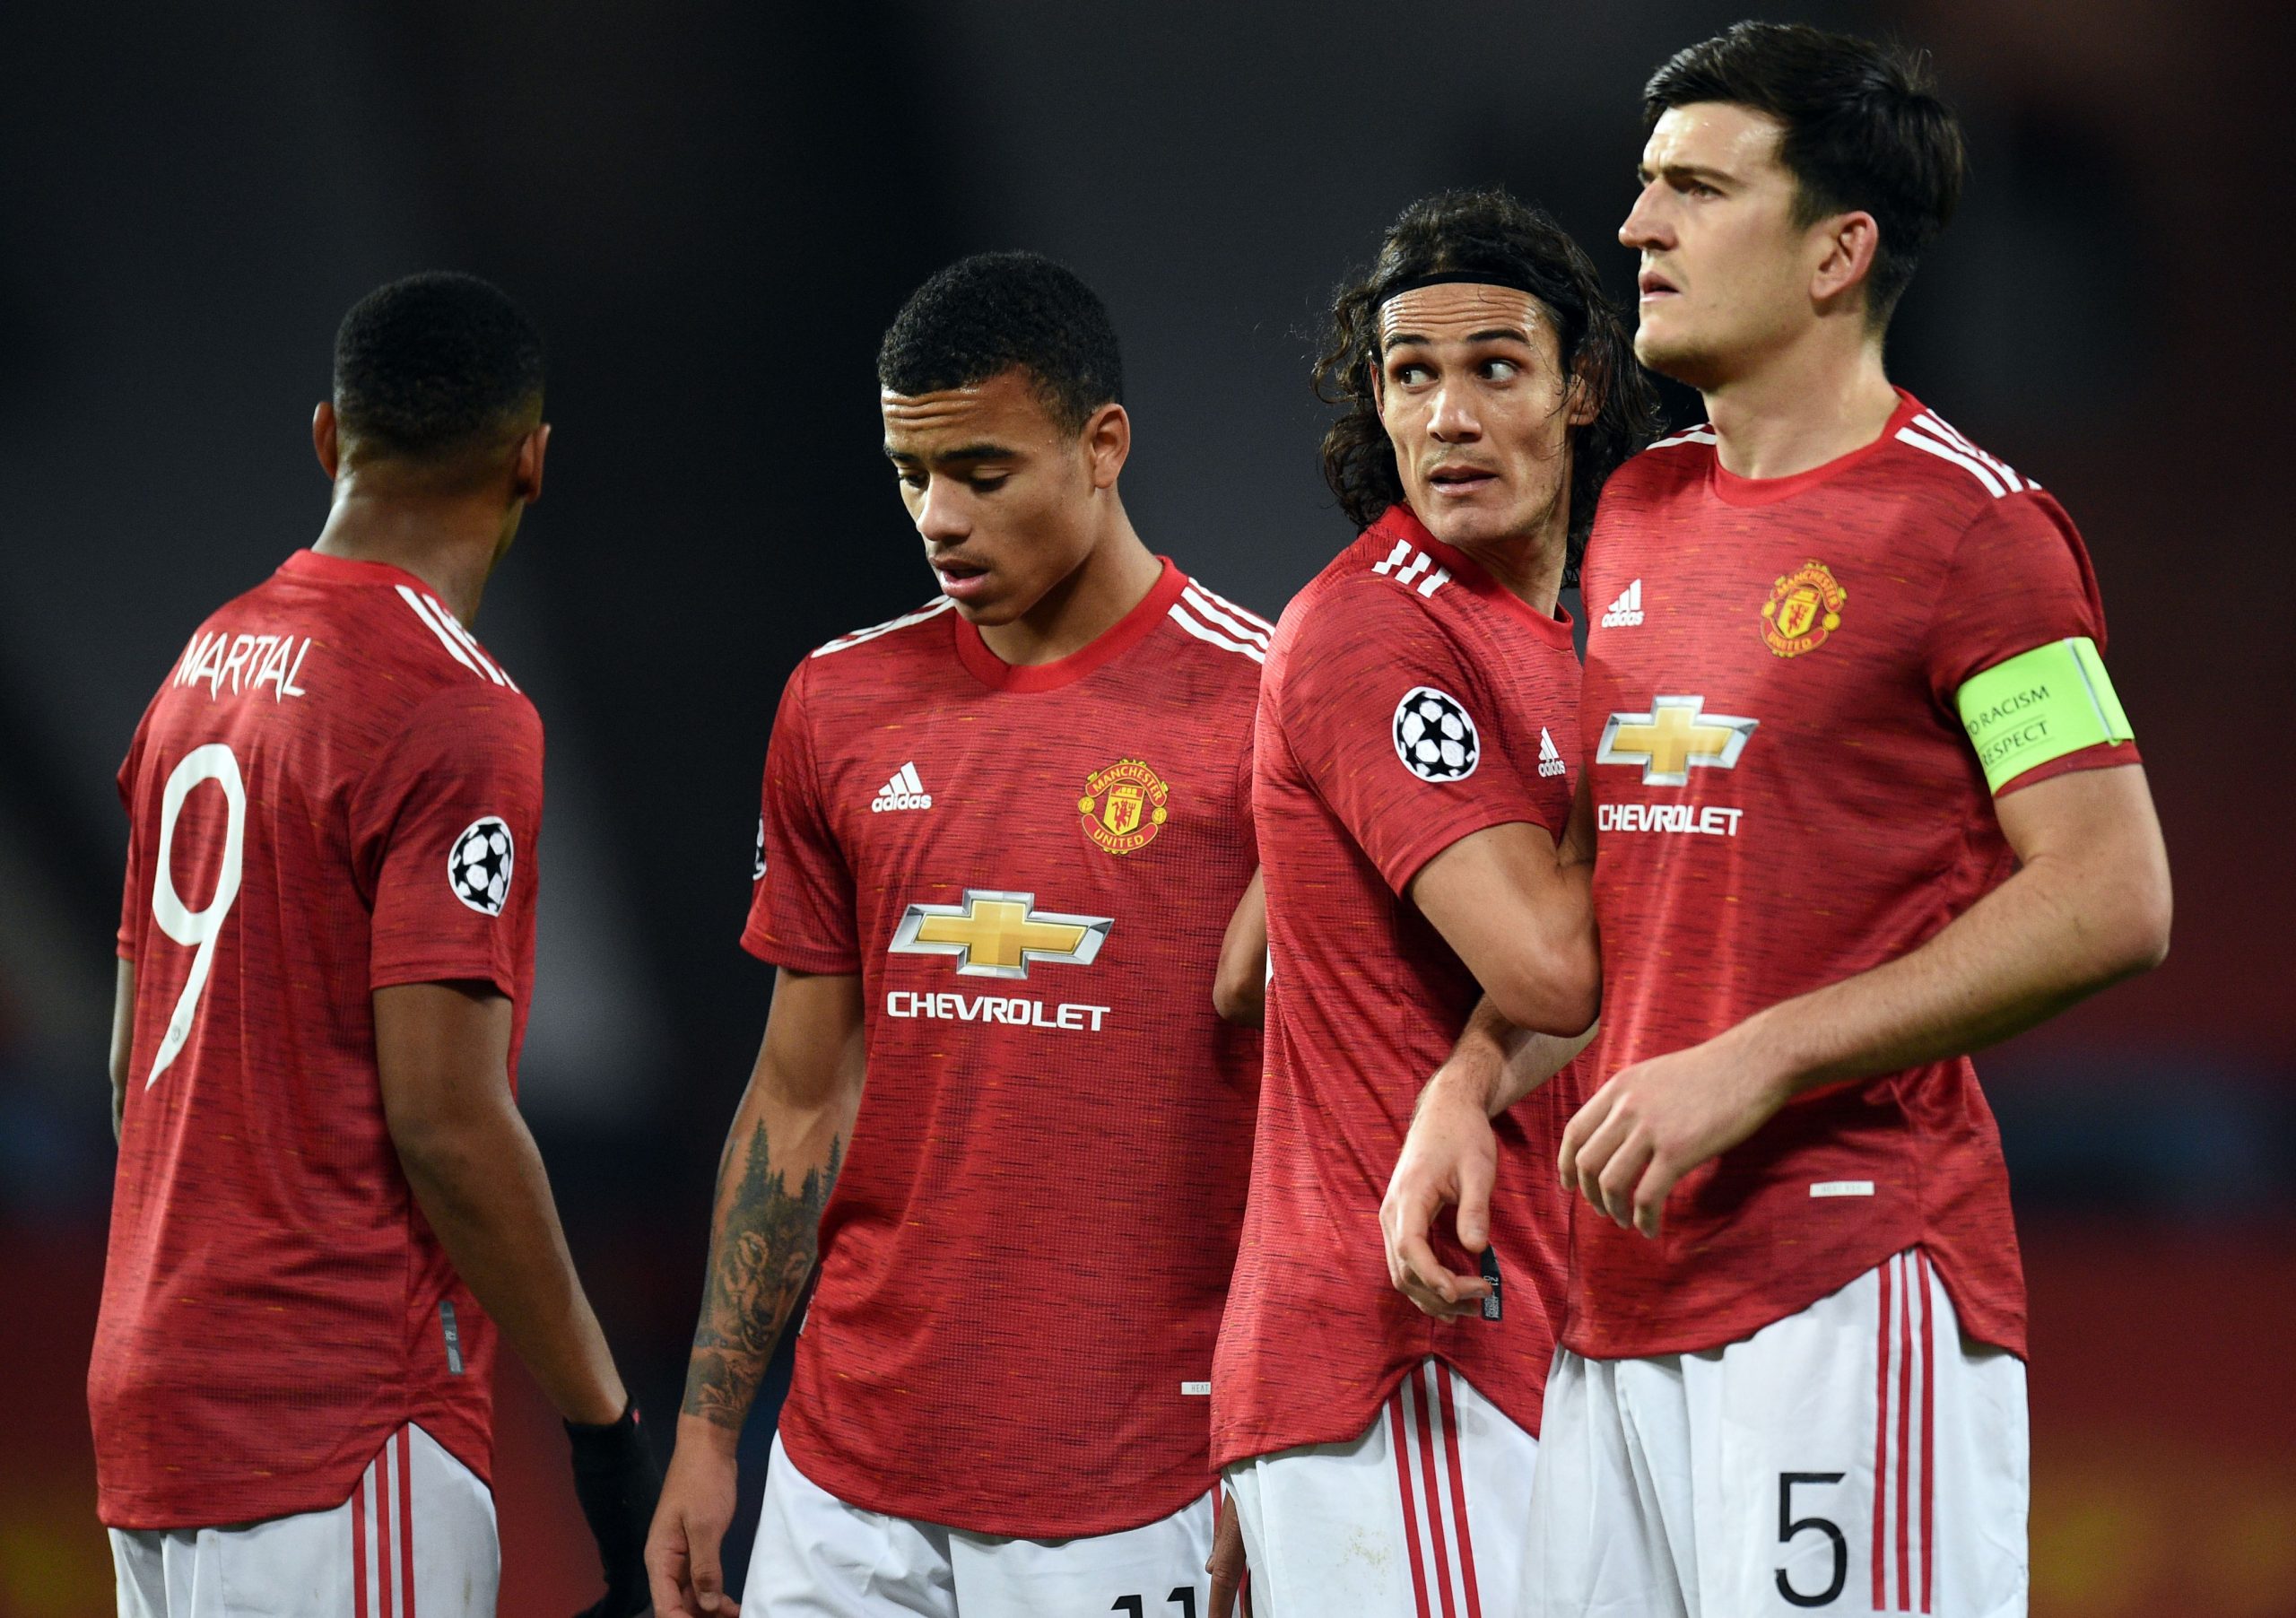 4-2-3-1 Manchester United Predicted Lineup Vs West Ham United (Man United players are seen in the photo)